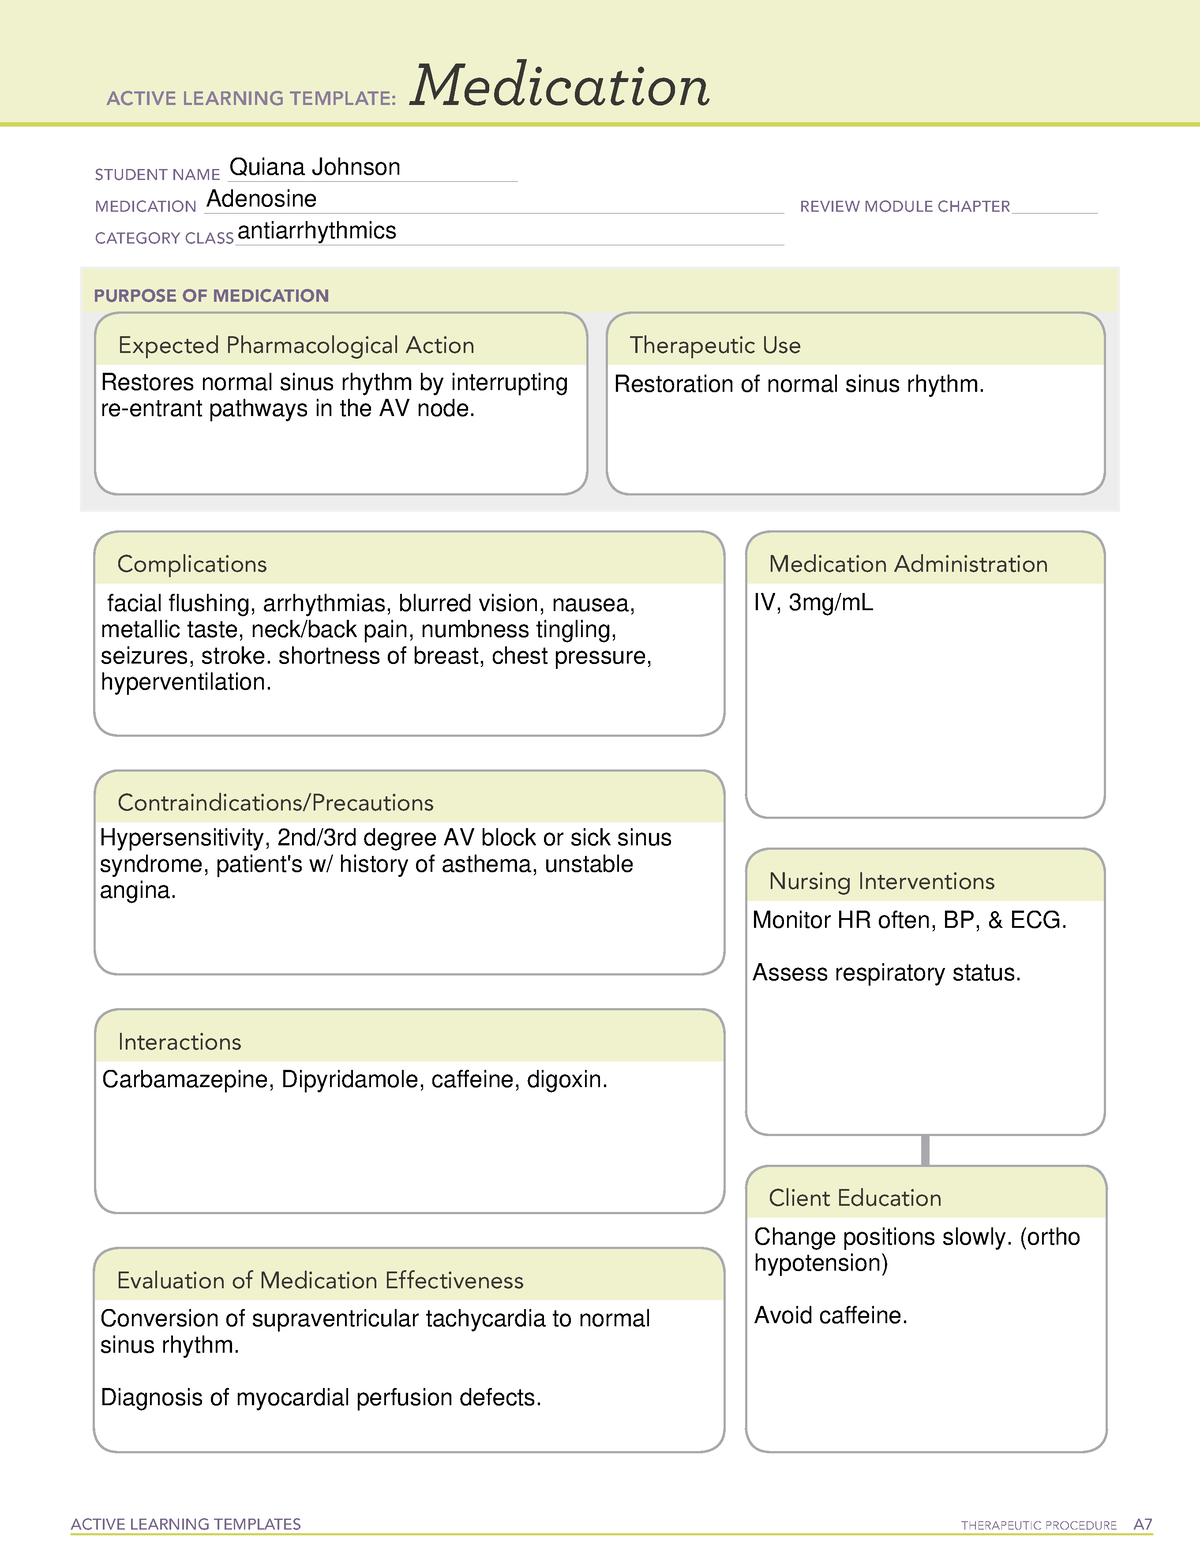 adenosine-drug-card-active-learning-templates-therapeutic-procedure-a-medication-student